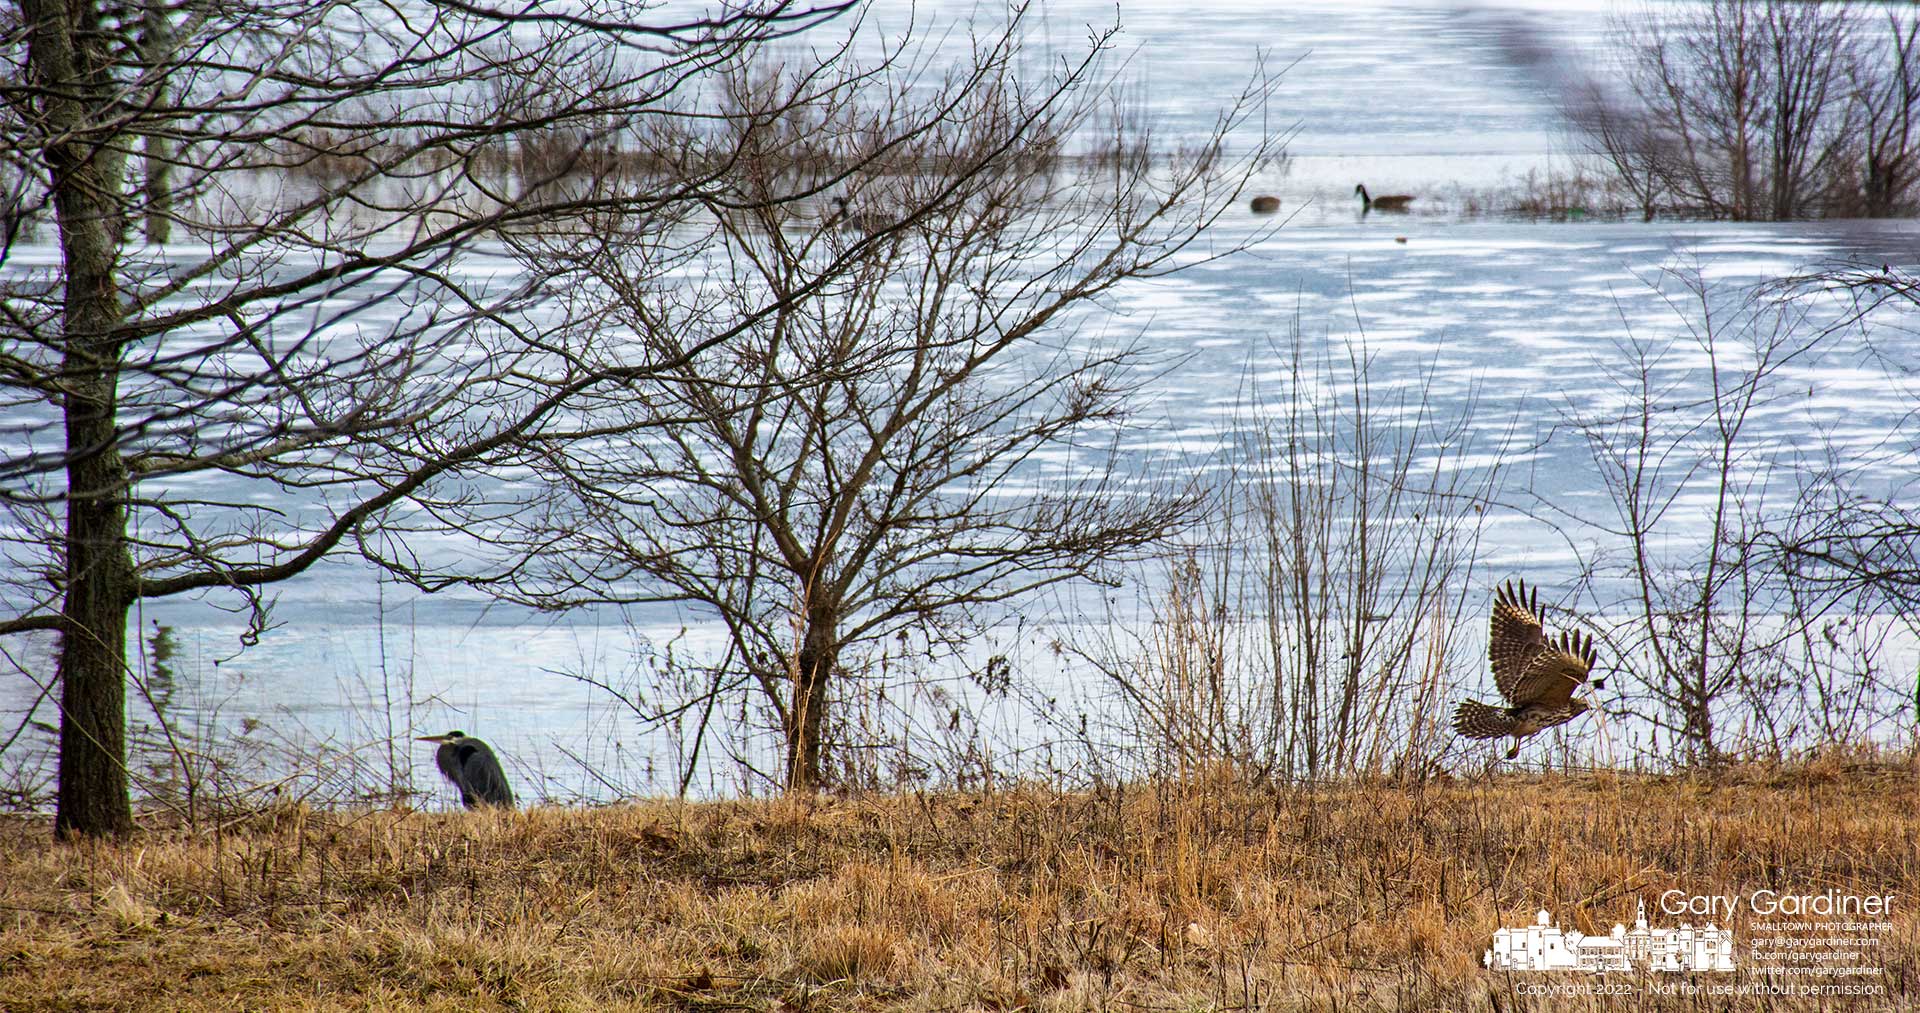 A hawk flies along the shoreline of Hoover Reservoir past a fishing blue heron and geese treading on the high waters of the lake. My Final Photo for Feb. 18, 2021.